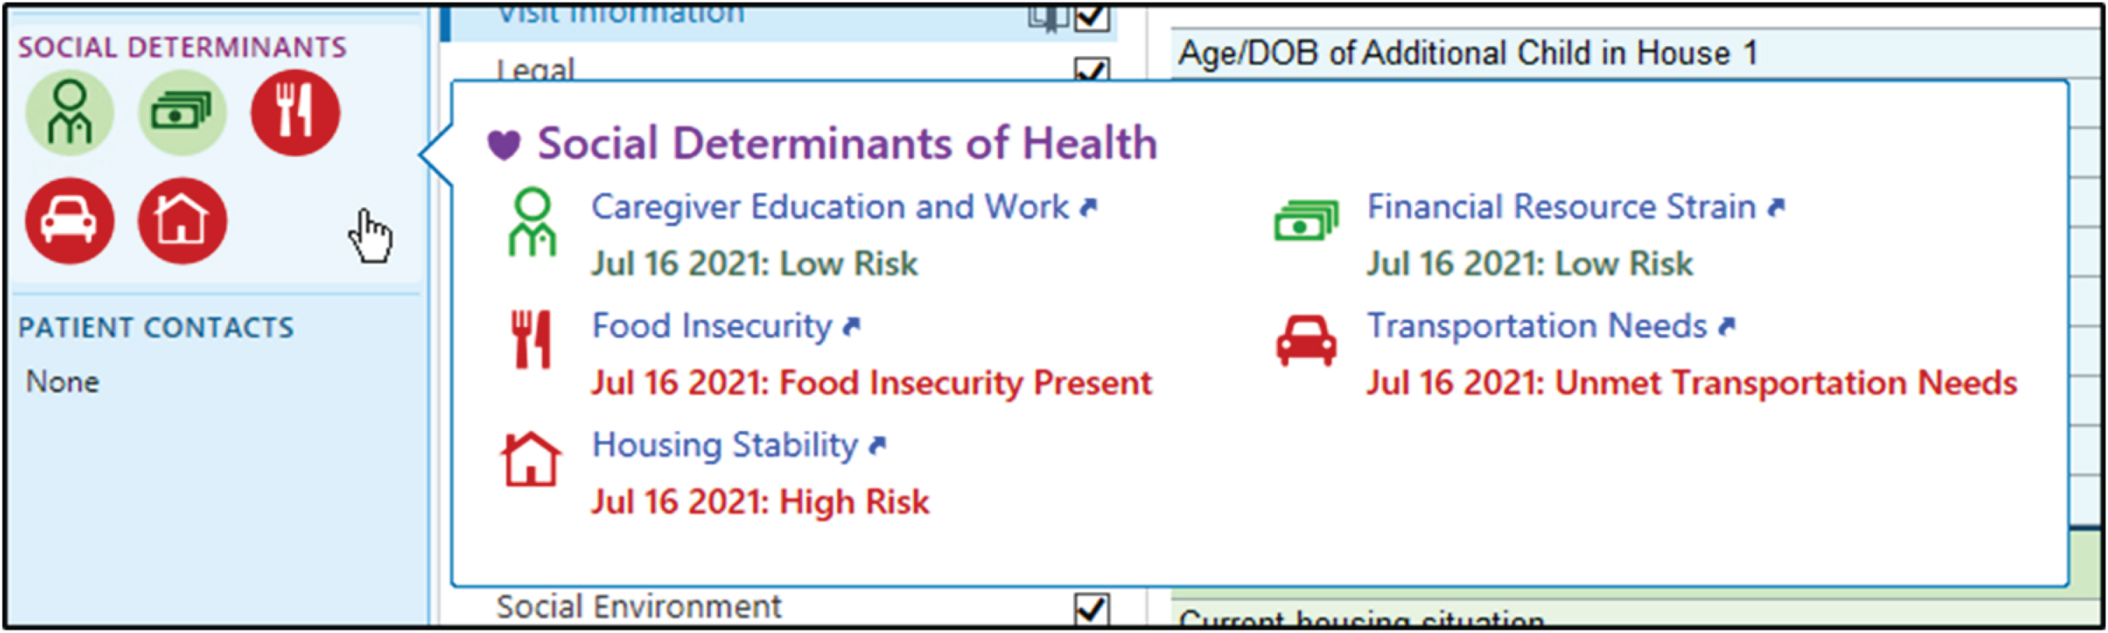 Social determinants of health (SDOH) specific questions are included in the social work clinical documentation. Subsequently, other SDOH activity related functionality is automatic updated in EPIC® (e.g., Storyboard icons, the SDOH domain wheel, SDOH risk scores).